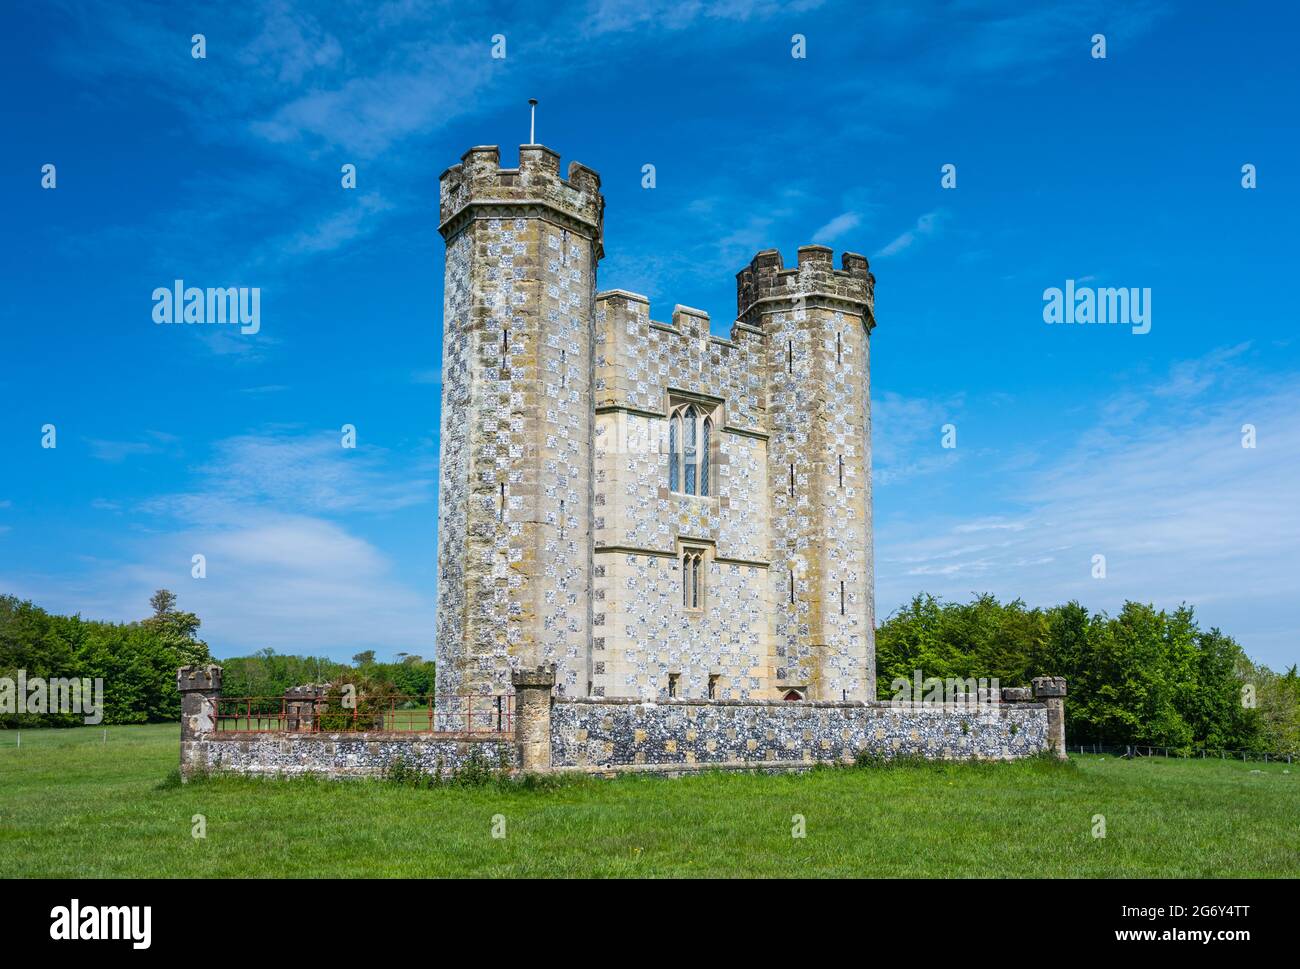 Hiorne Tower in Arundel Park, an 18th century folly by Sir Francis Hiorne in Gothic revival style located in Arundel Park, Arundel, West Sussex, UK. Stock Photo